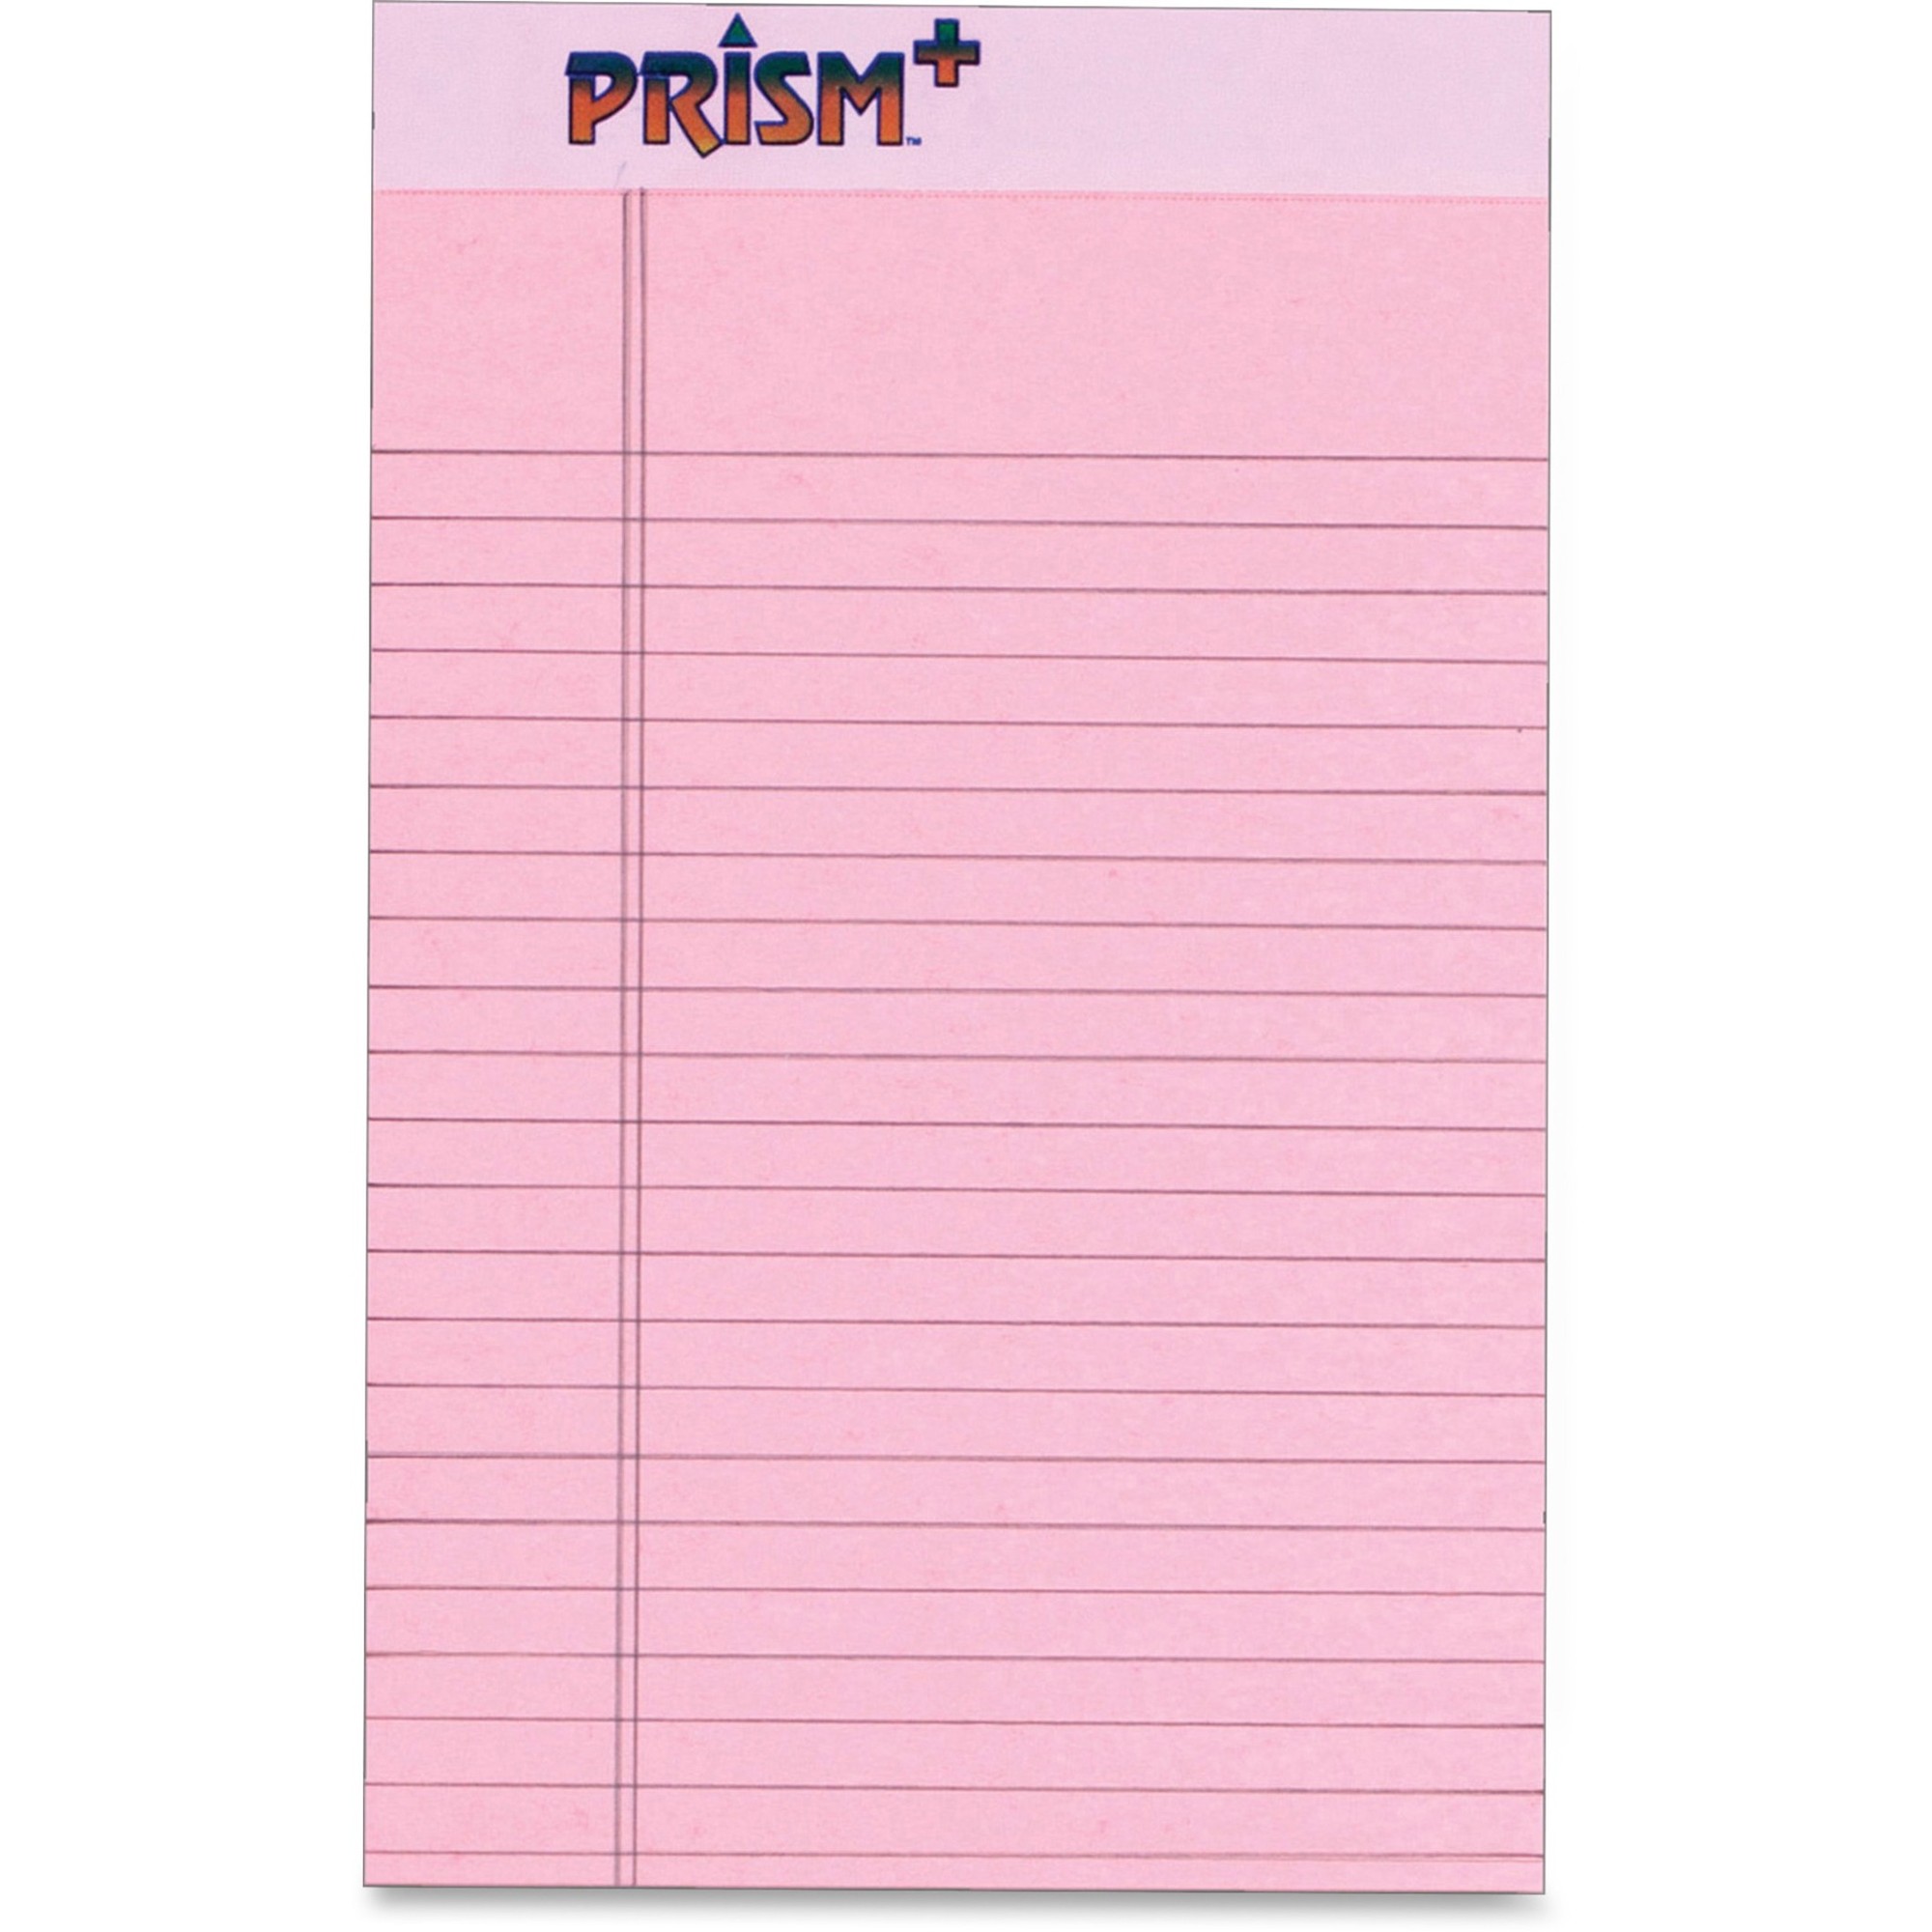 TOPS Prism Plus Legal Pads - Jr.Legal - 50 Sheets - 0.28" Ruled - 16 lb Basis Weight - Jr.Legal - 5" x 8" - Pink Paper - Hard Co